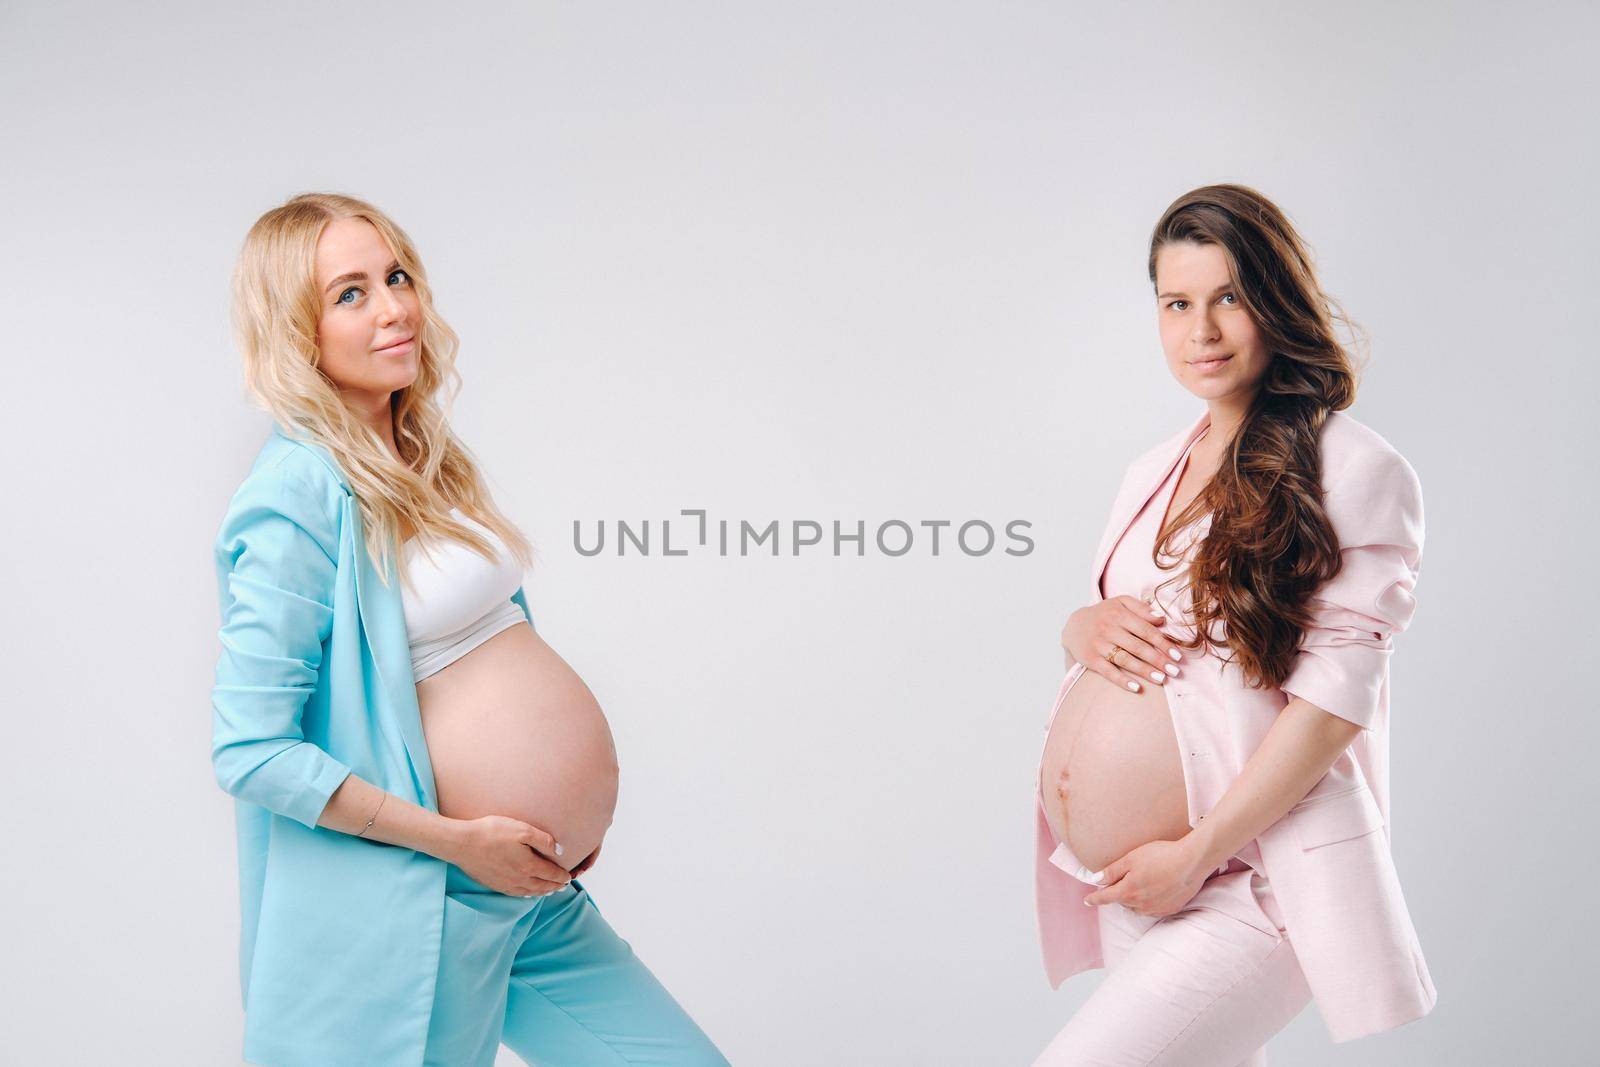 Two pregnant women with big bellies in suits on a gray background.